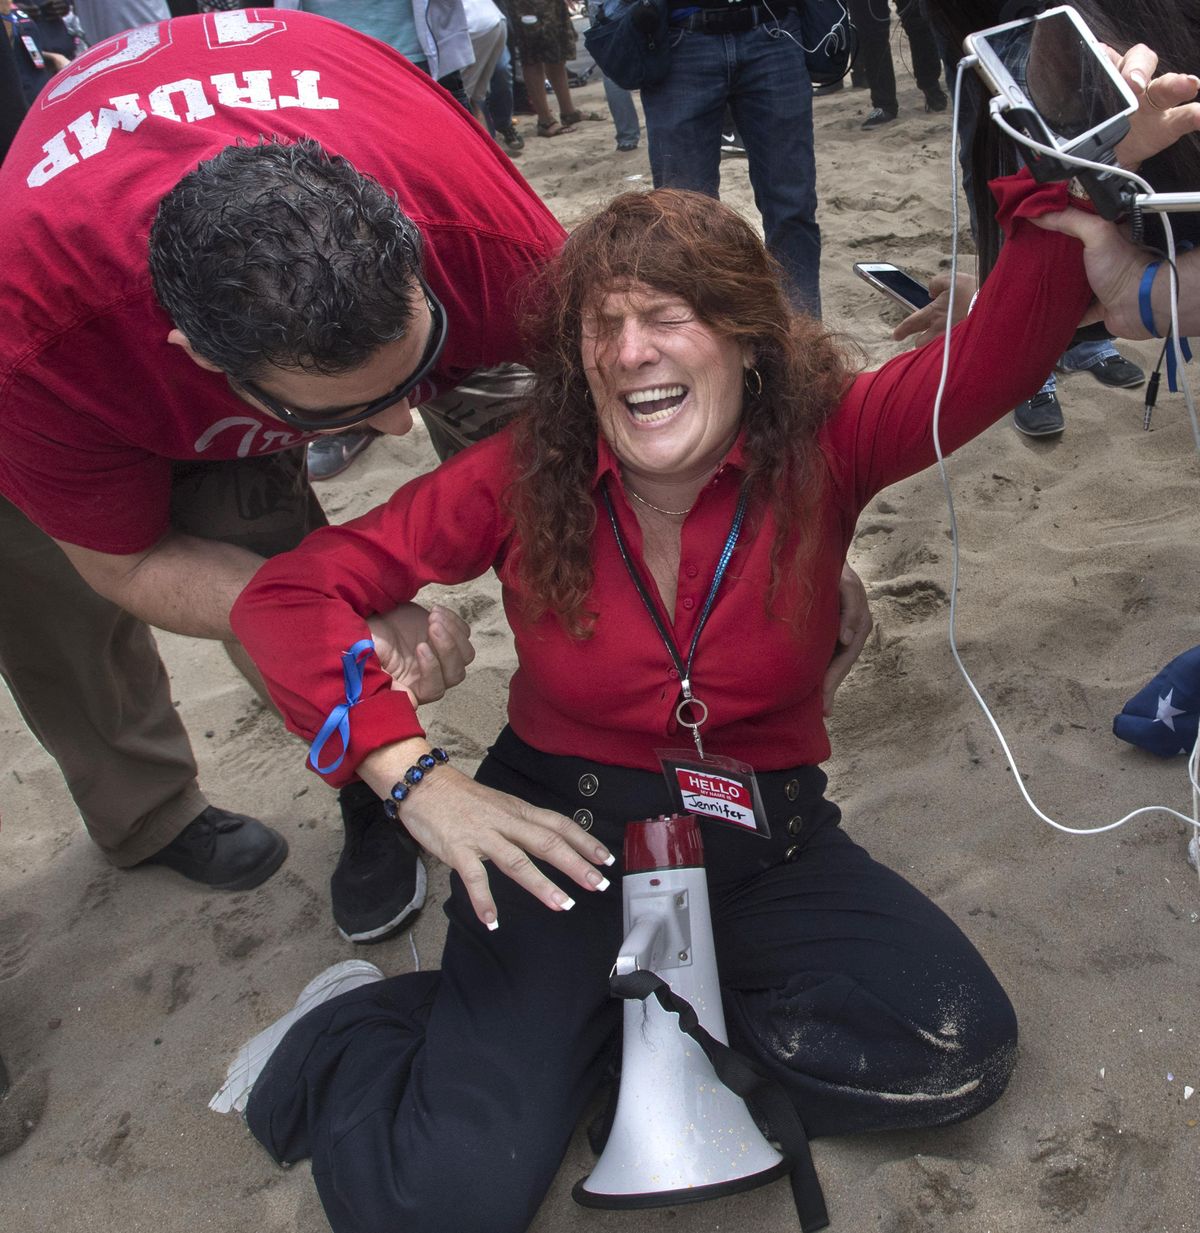 Jennifer Sterling, one of the organizers of the pro-Donald Trump rally, reacts after getting hit with pepper spray in Huntington Beach, Calif., on Saturday. Violence erupted when a march of about 2,000 Trump supporters at Bolsa Chica State Beach reached a group of about 30 counter-protesters, some of whom began spraying pepper spray, said Capt. Kevin Pearsall of the California State Parks police. (Mindy Schauer / Associated Press)